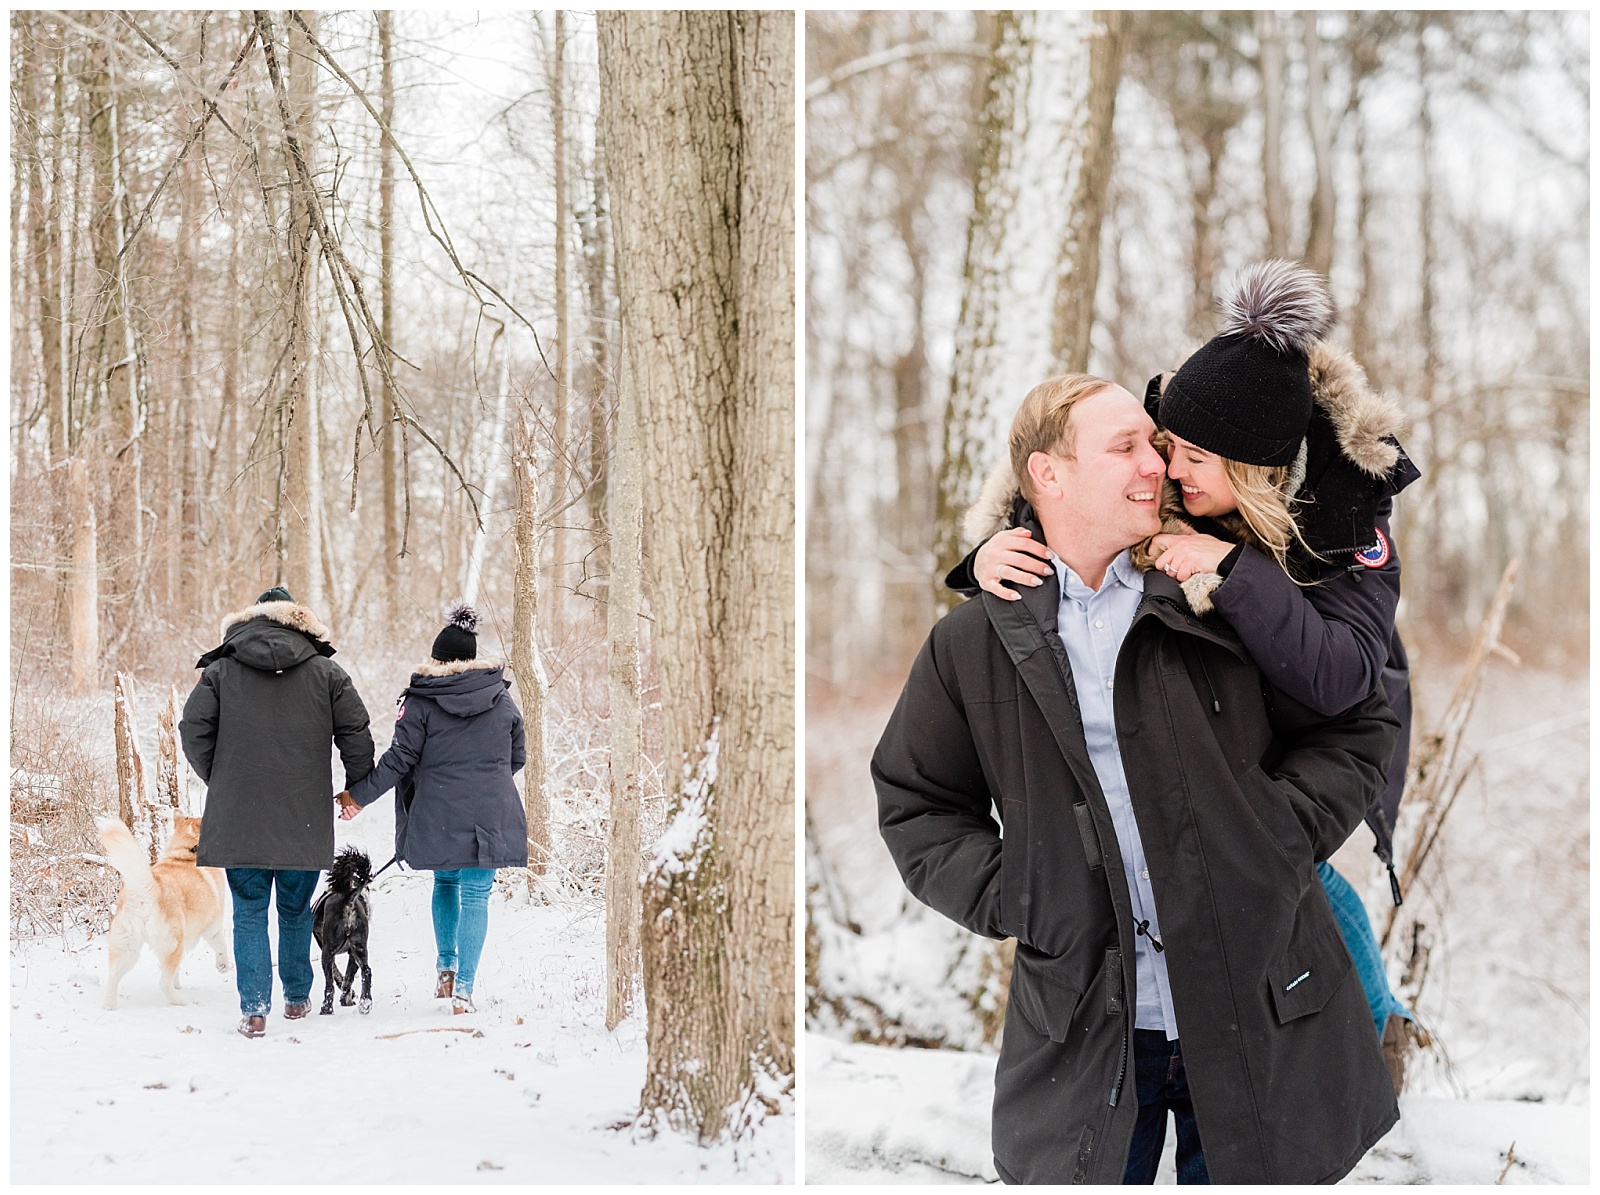 New Jersey Engagement Session, Snowy, Winter, Cozy, Session, Wedding Photographer, dogs, furbabies, husky, woods